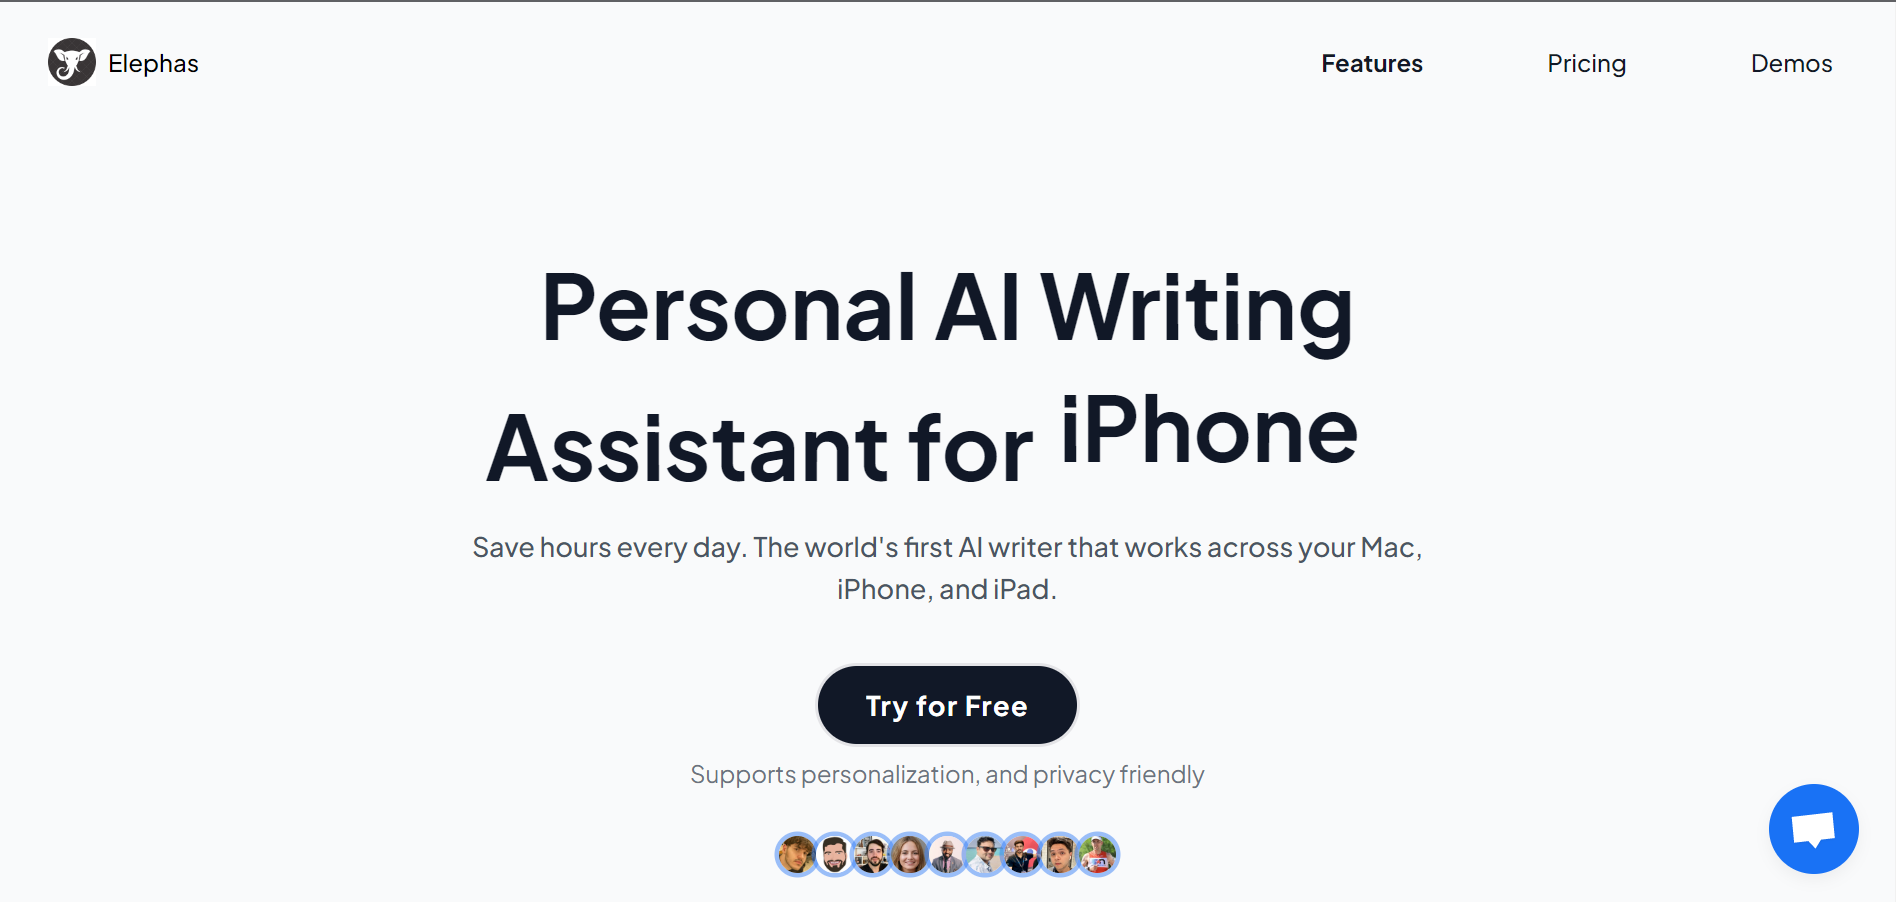 Unleash the Power of Your Mac with Elephas.app – The Ultimate AI Writing Tool!